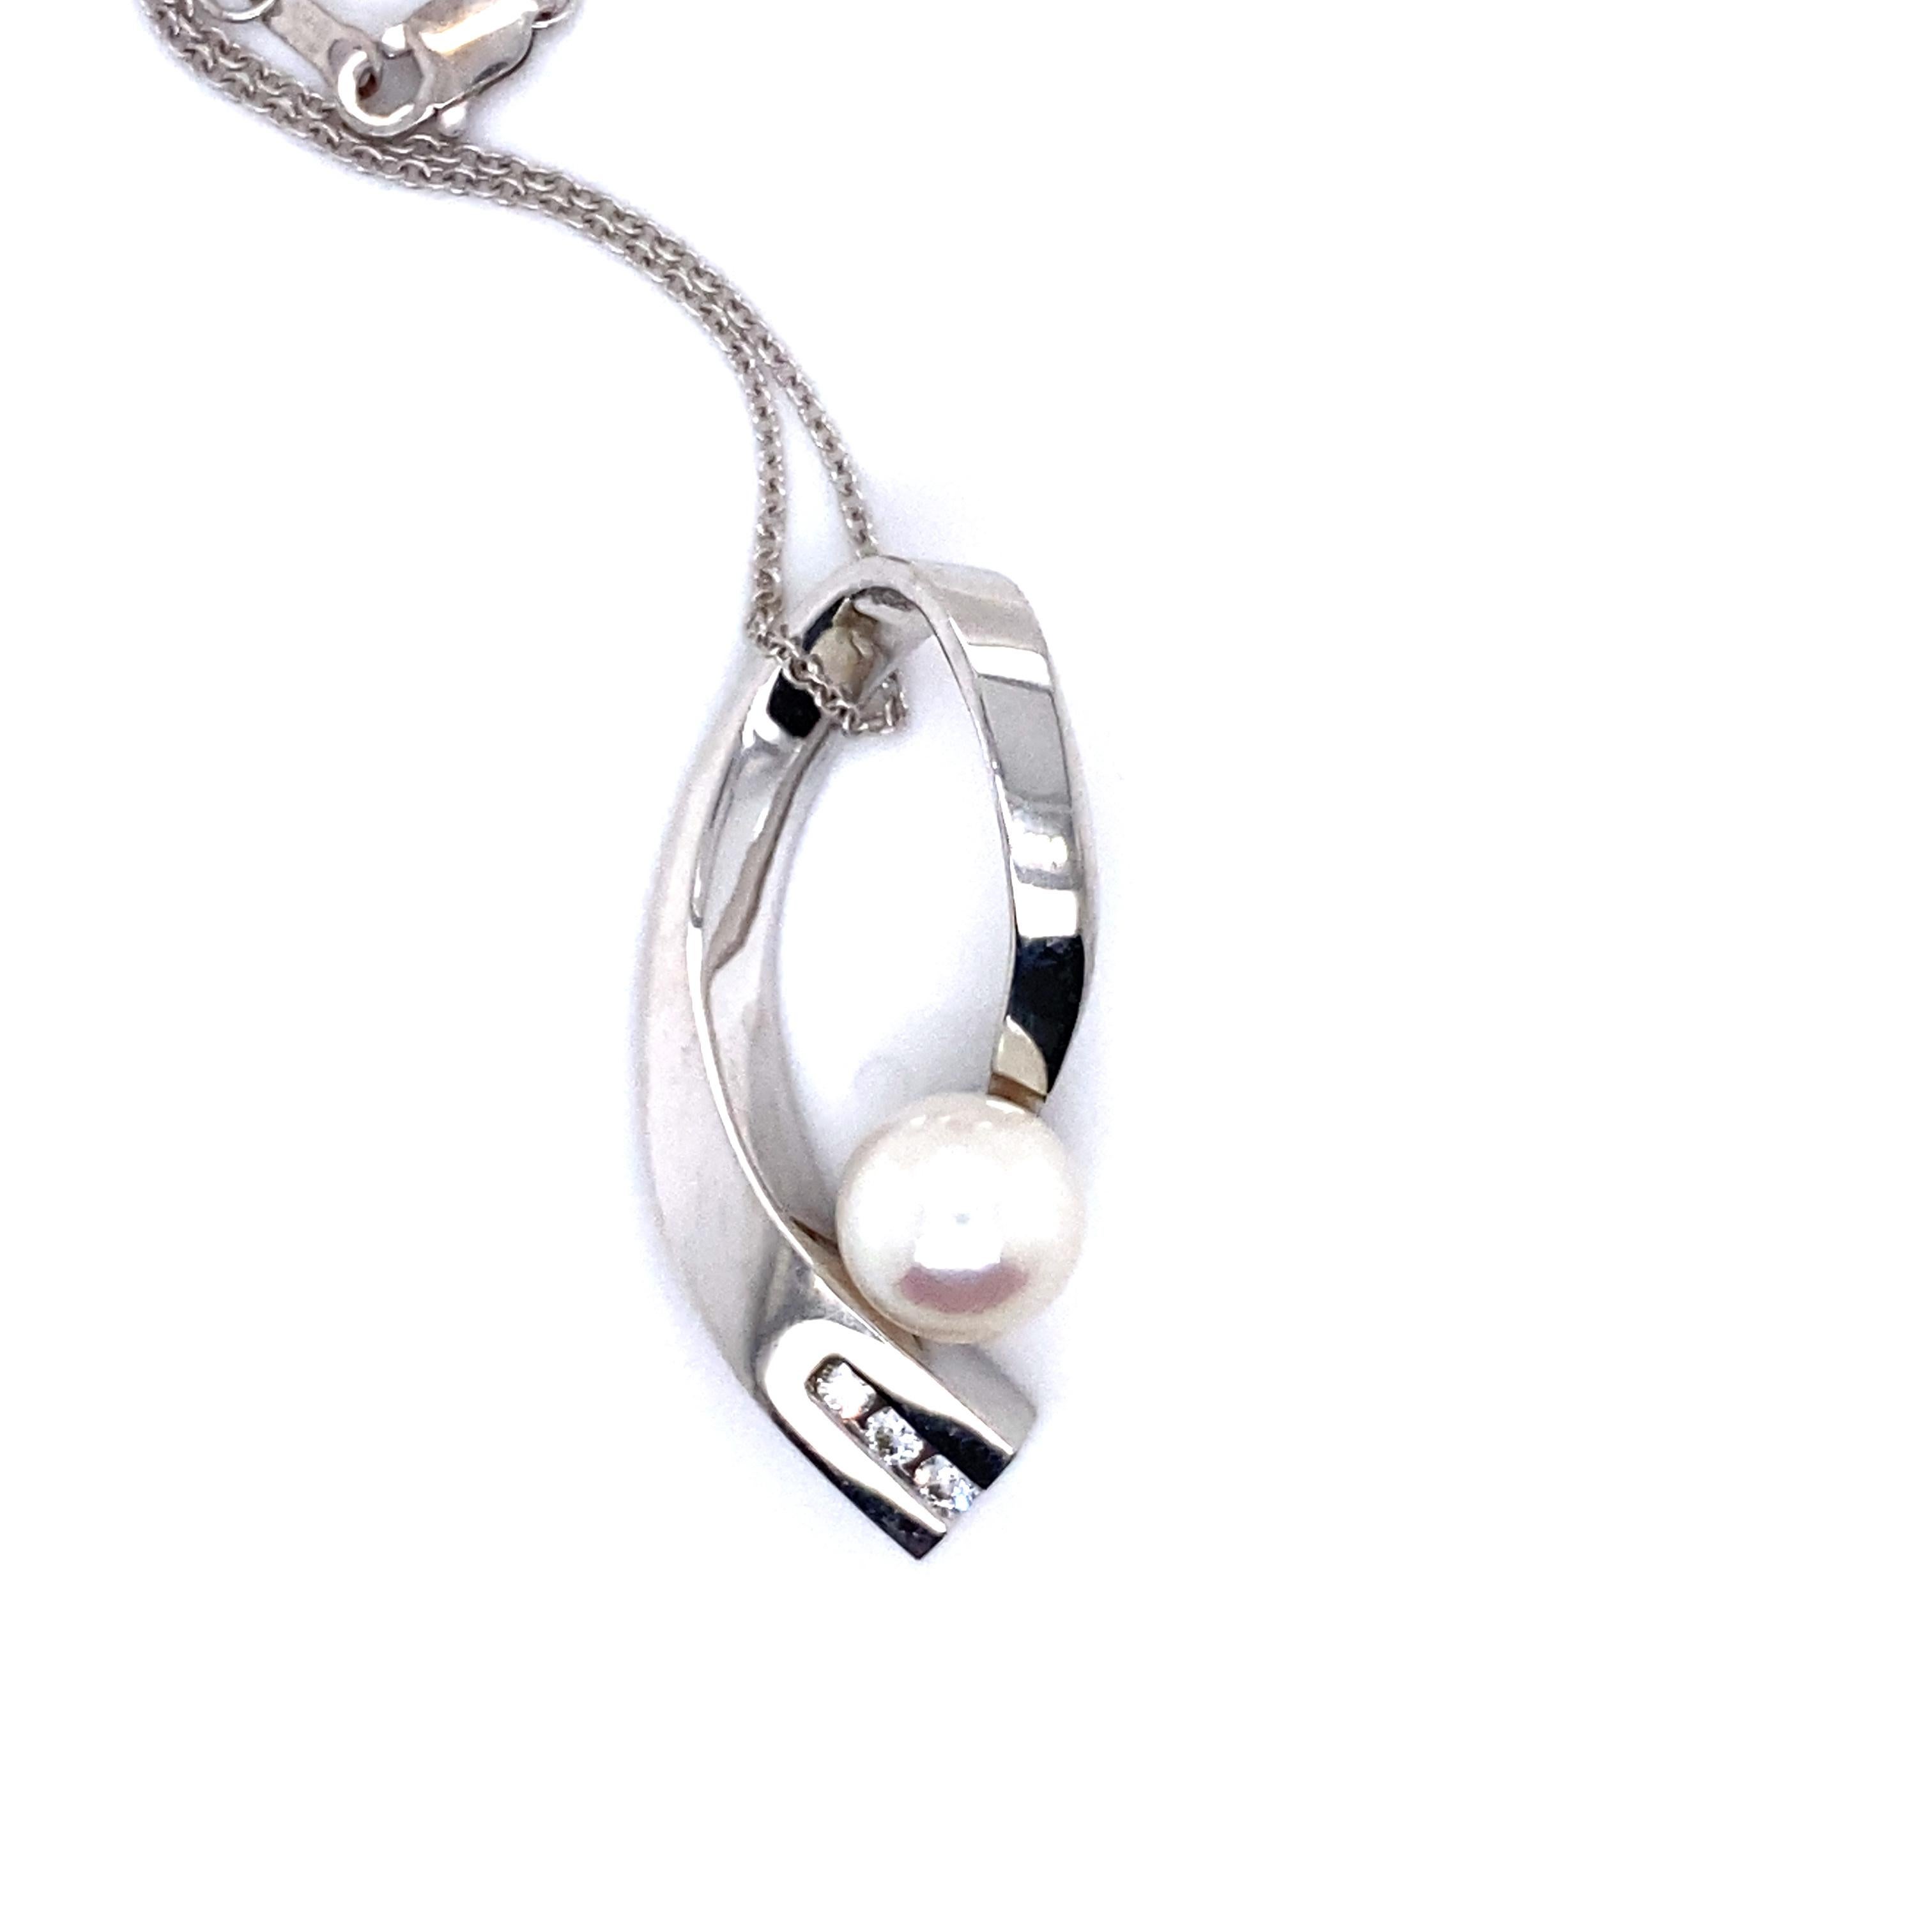 This Beautiful Vintage Diamond and Pearl Abstract Pendant with Chain is, well, just beautiful! Crafted in 14K White Gold, the design features a unique open shape, with a central cultured Pearl, accents with diamonds. In the center, the pendant holds